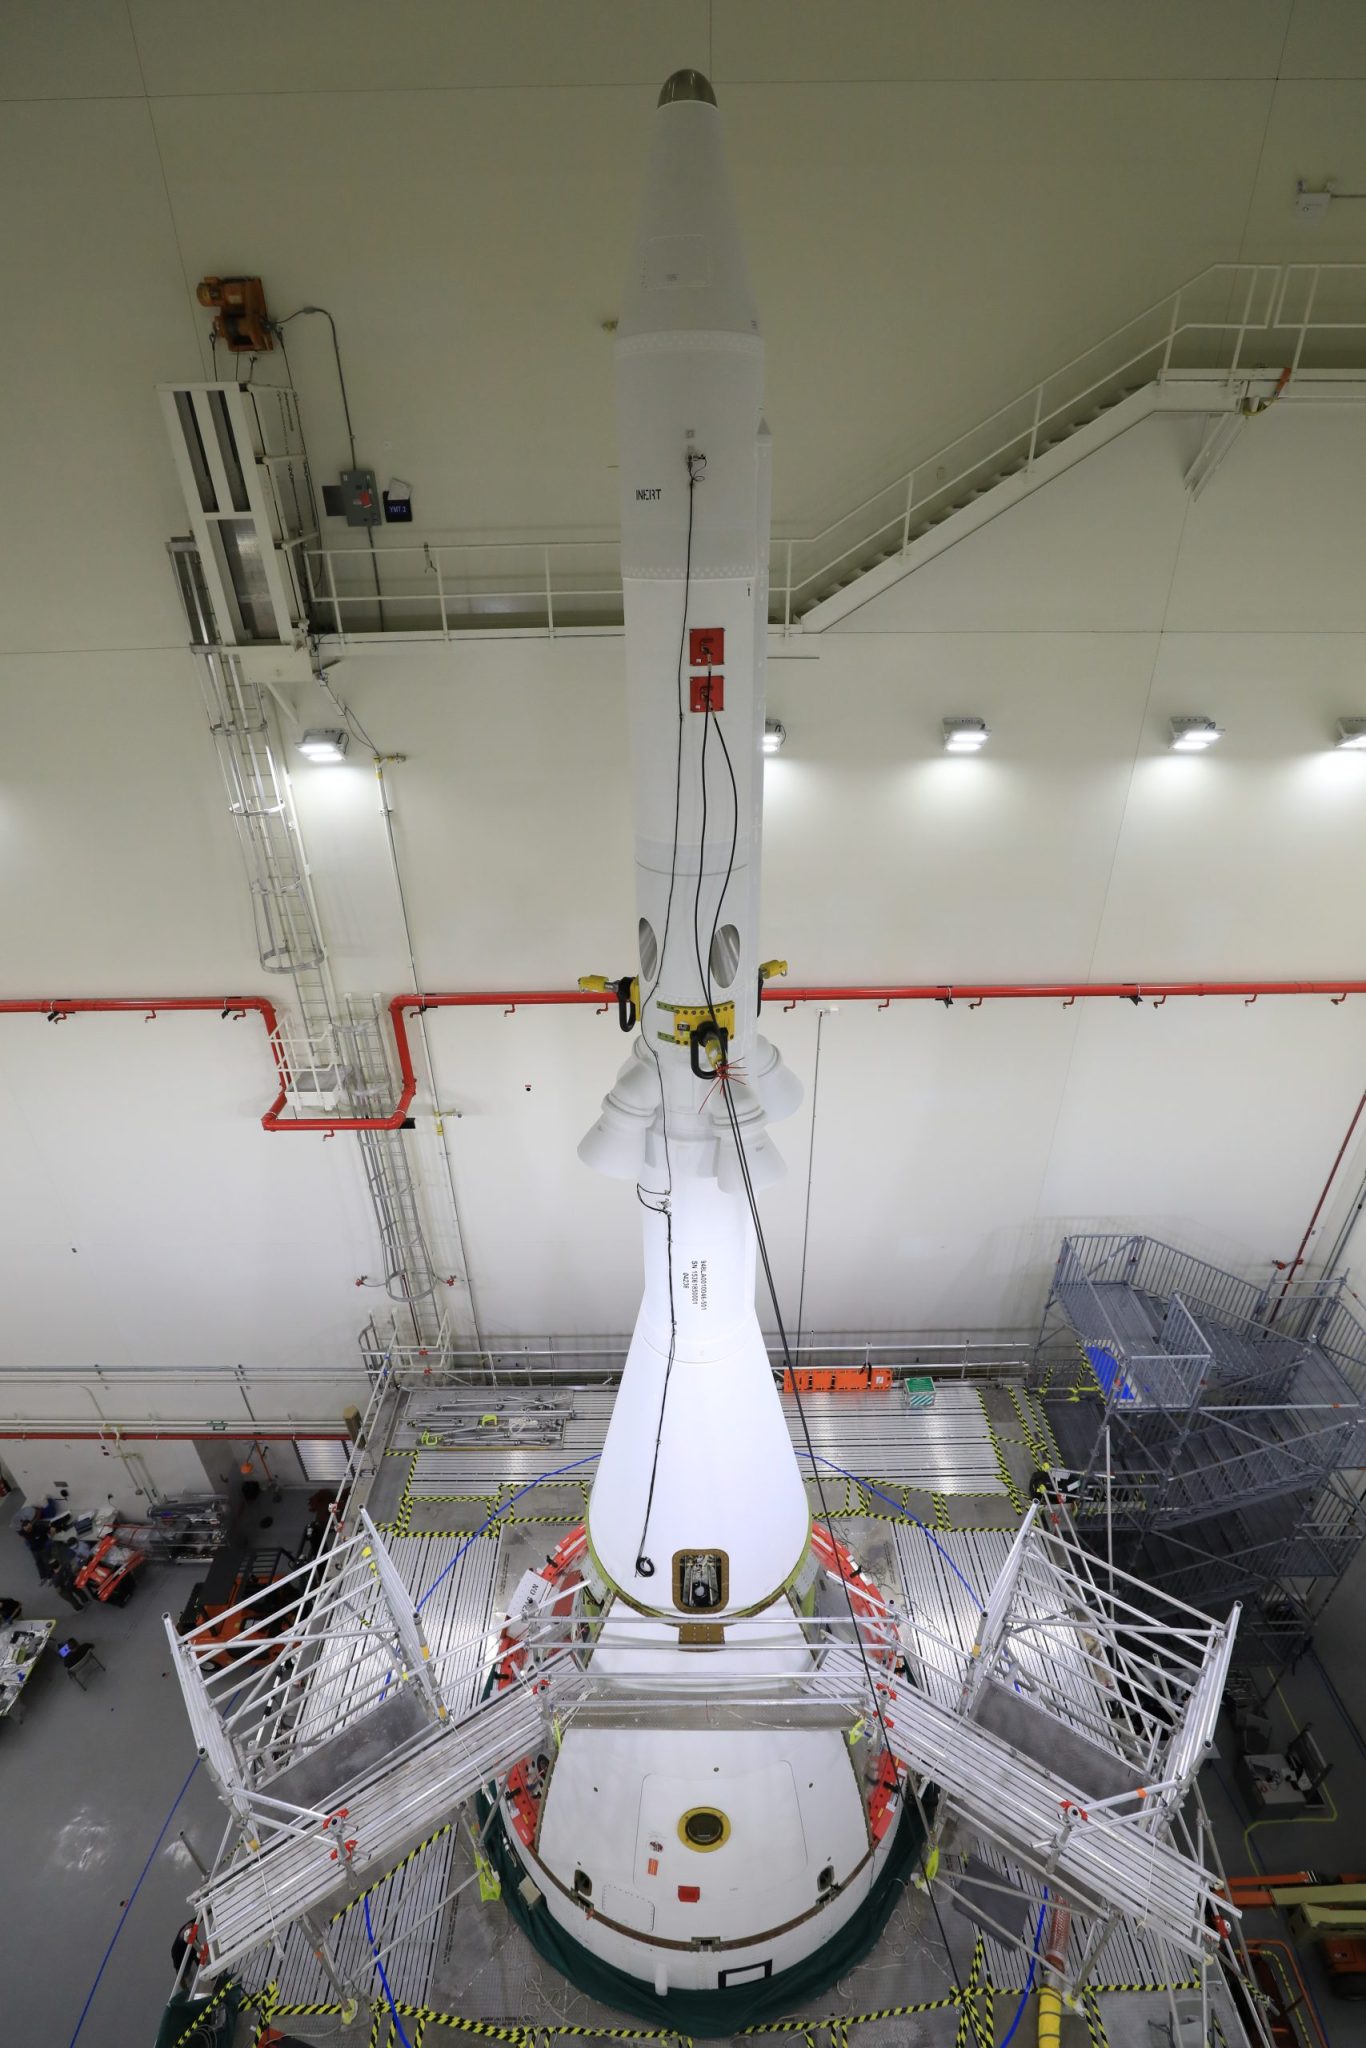 The four ogive fairings on the Orion spacecraft for the Artemis I mission are installed on the launch abort system assembly.